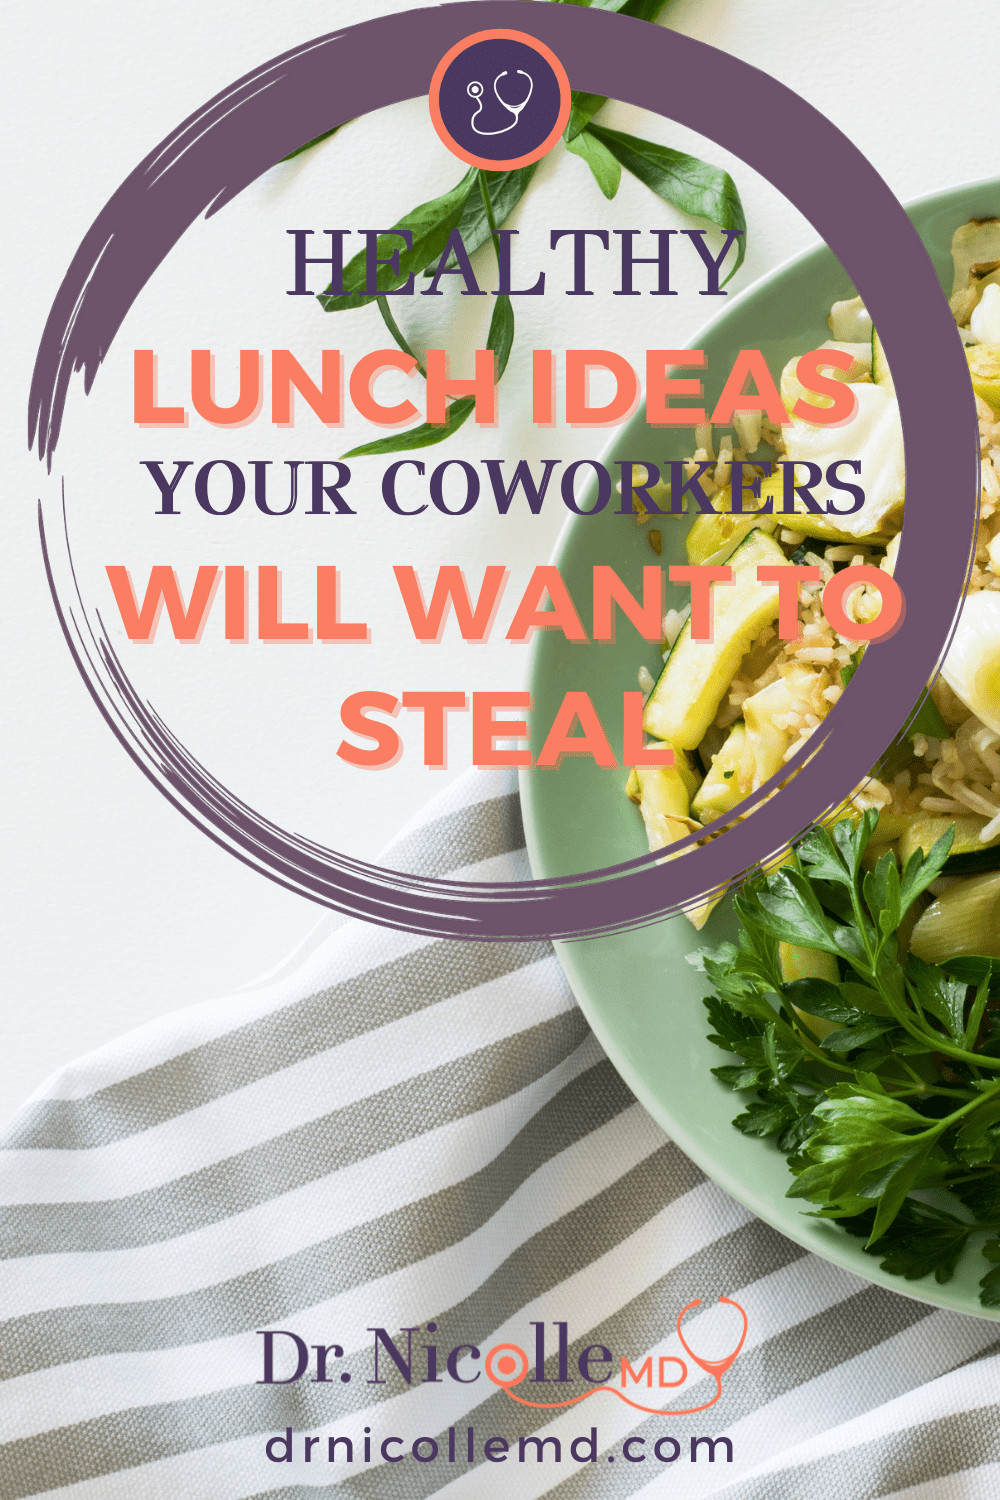 Healthy Lunch Ideas Your Coworkers Will Want to Steal